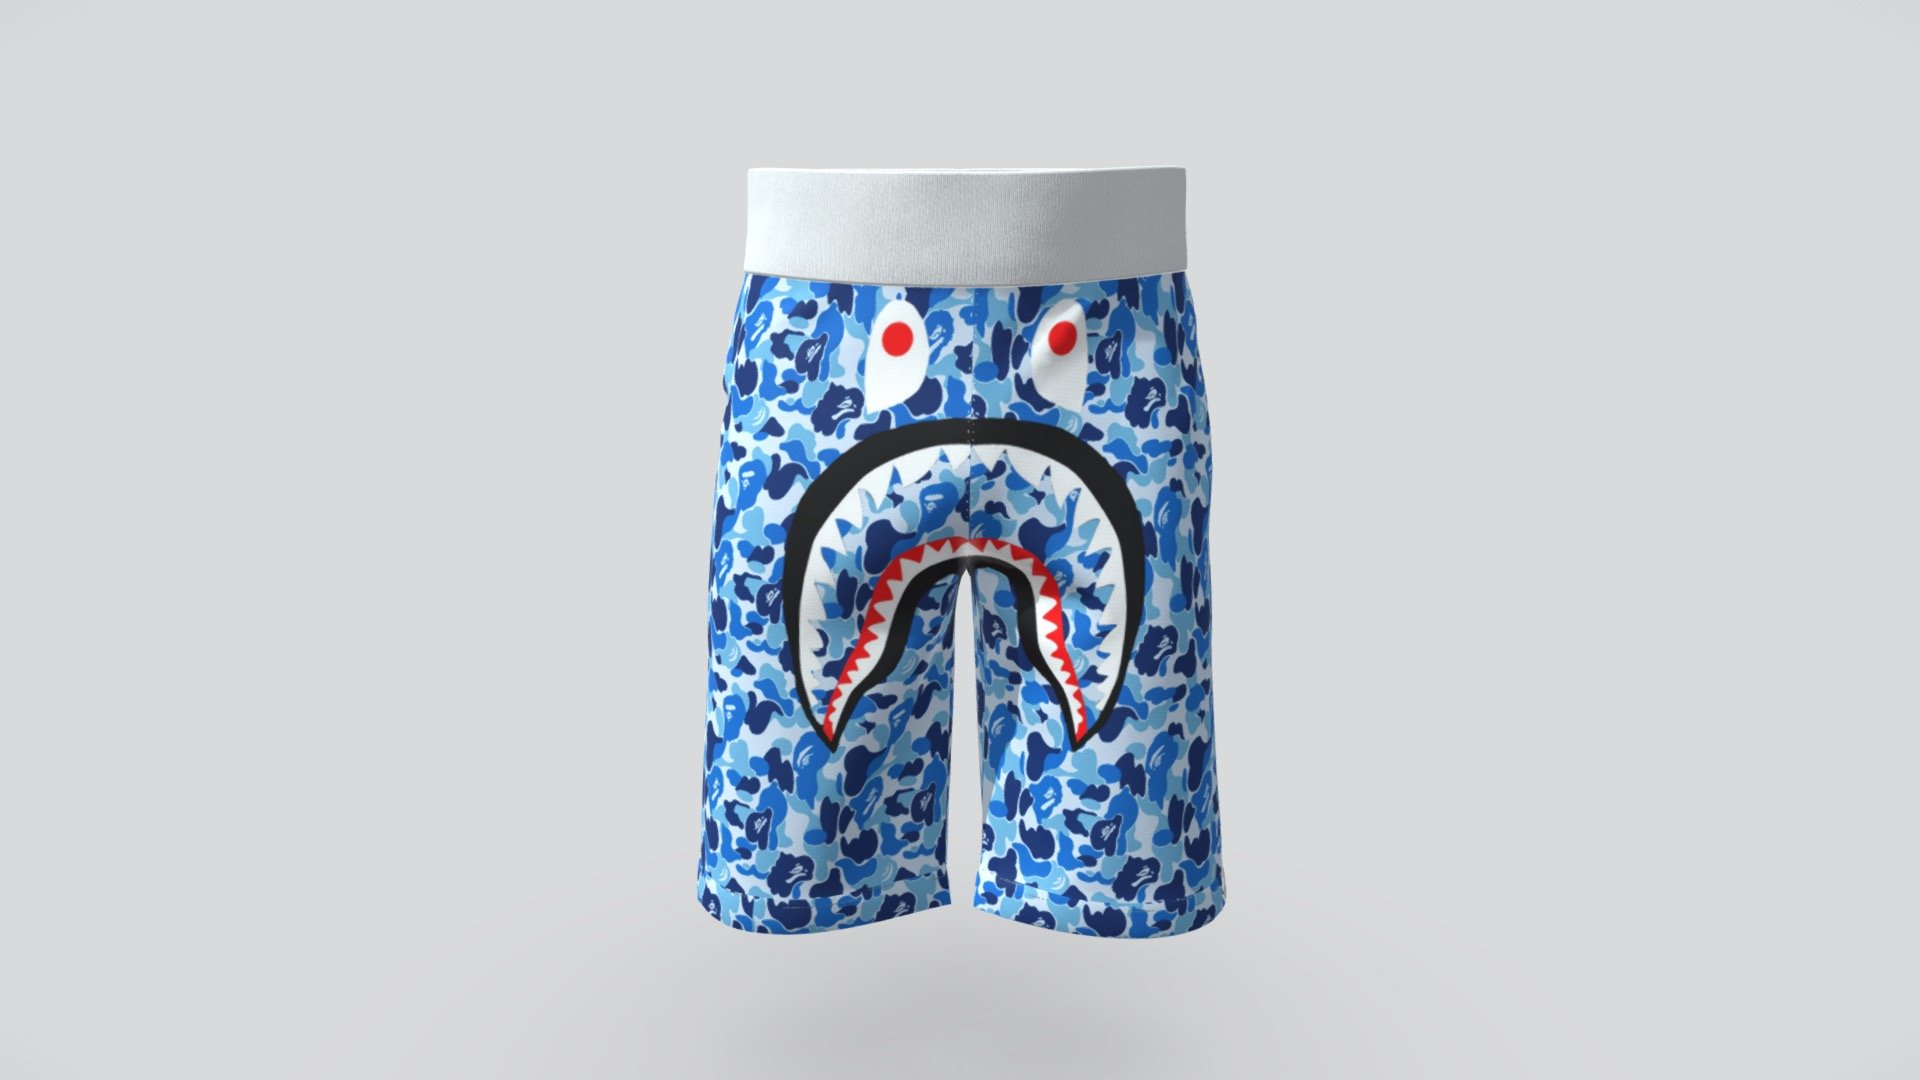 A BATHING APE®
Camouflage print track shorts. 3D model. For man.
Blue cotton camouflage print track shorts from bape featuring an elasticated waistband, a back pocket and a knee length. With print on front. 
This shorts was created in Clo3D. 

Licence: You are free to use this model in any of your projects. Please remember to credit Virtual Rugs and subscribe for more upcoming 3d models coming soon - BAPE Camouflage Print Track Shorts - 3D model by virtualrags 3d model